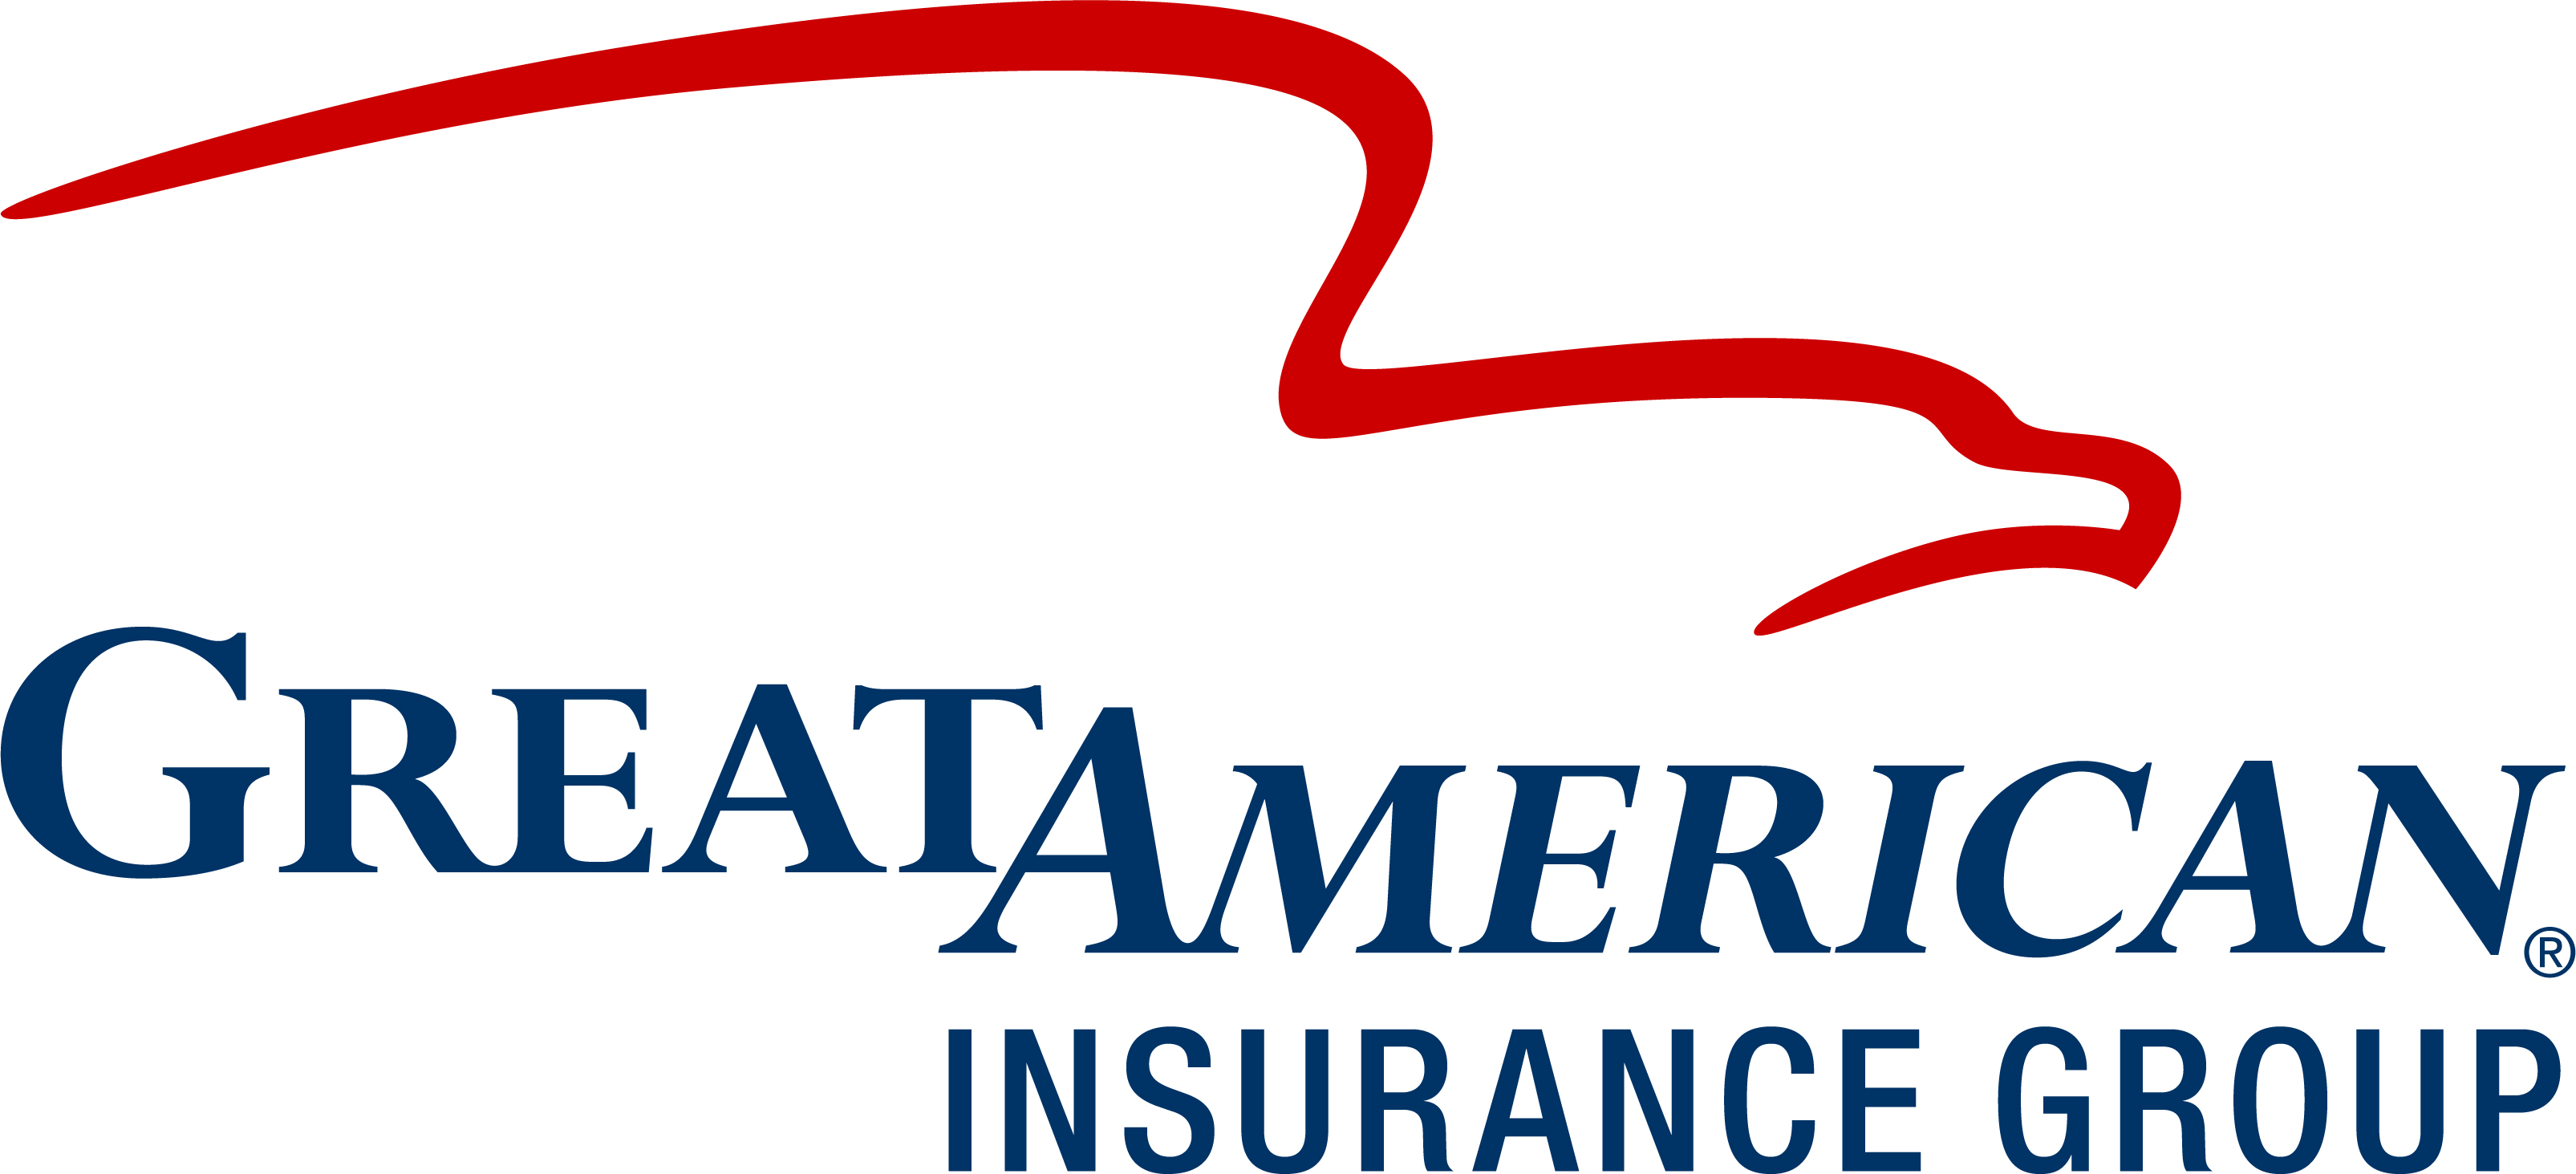 The Great American Insurance Group